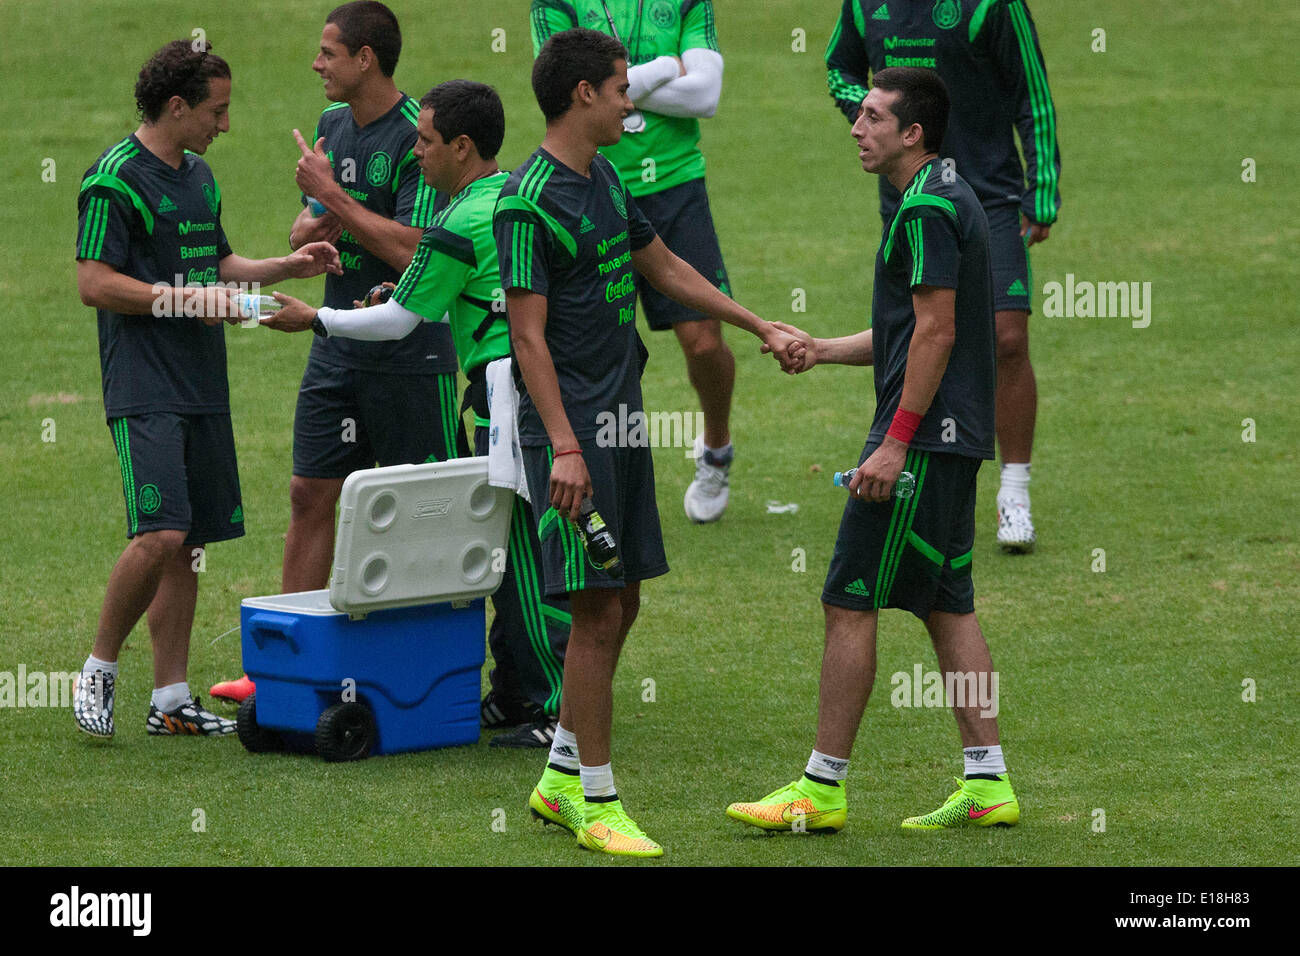 Mexico City, Mexico. 26th May, 2014. (L to R) Players Andres Guardado, Javier Hernandez, Diego Reyes and Hector Herrera of Mexico's national soccer team, take part in a training session before the Brazil 2014 FIFA World Cup, in the Azteca Stadium, in Mexico City, capital of Mexico, on May 26, 2014. Credit:  Pedro Mera/Xinhua/Alamy Live News Stock Photo